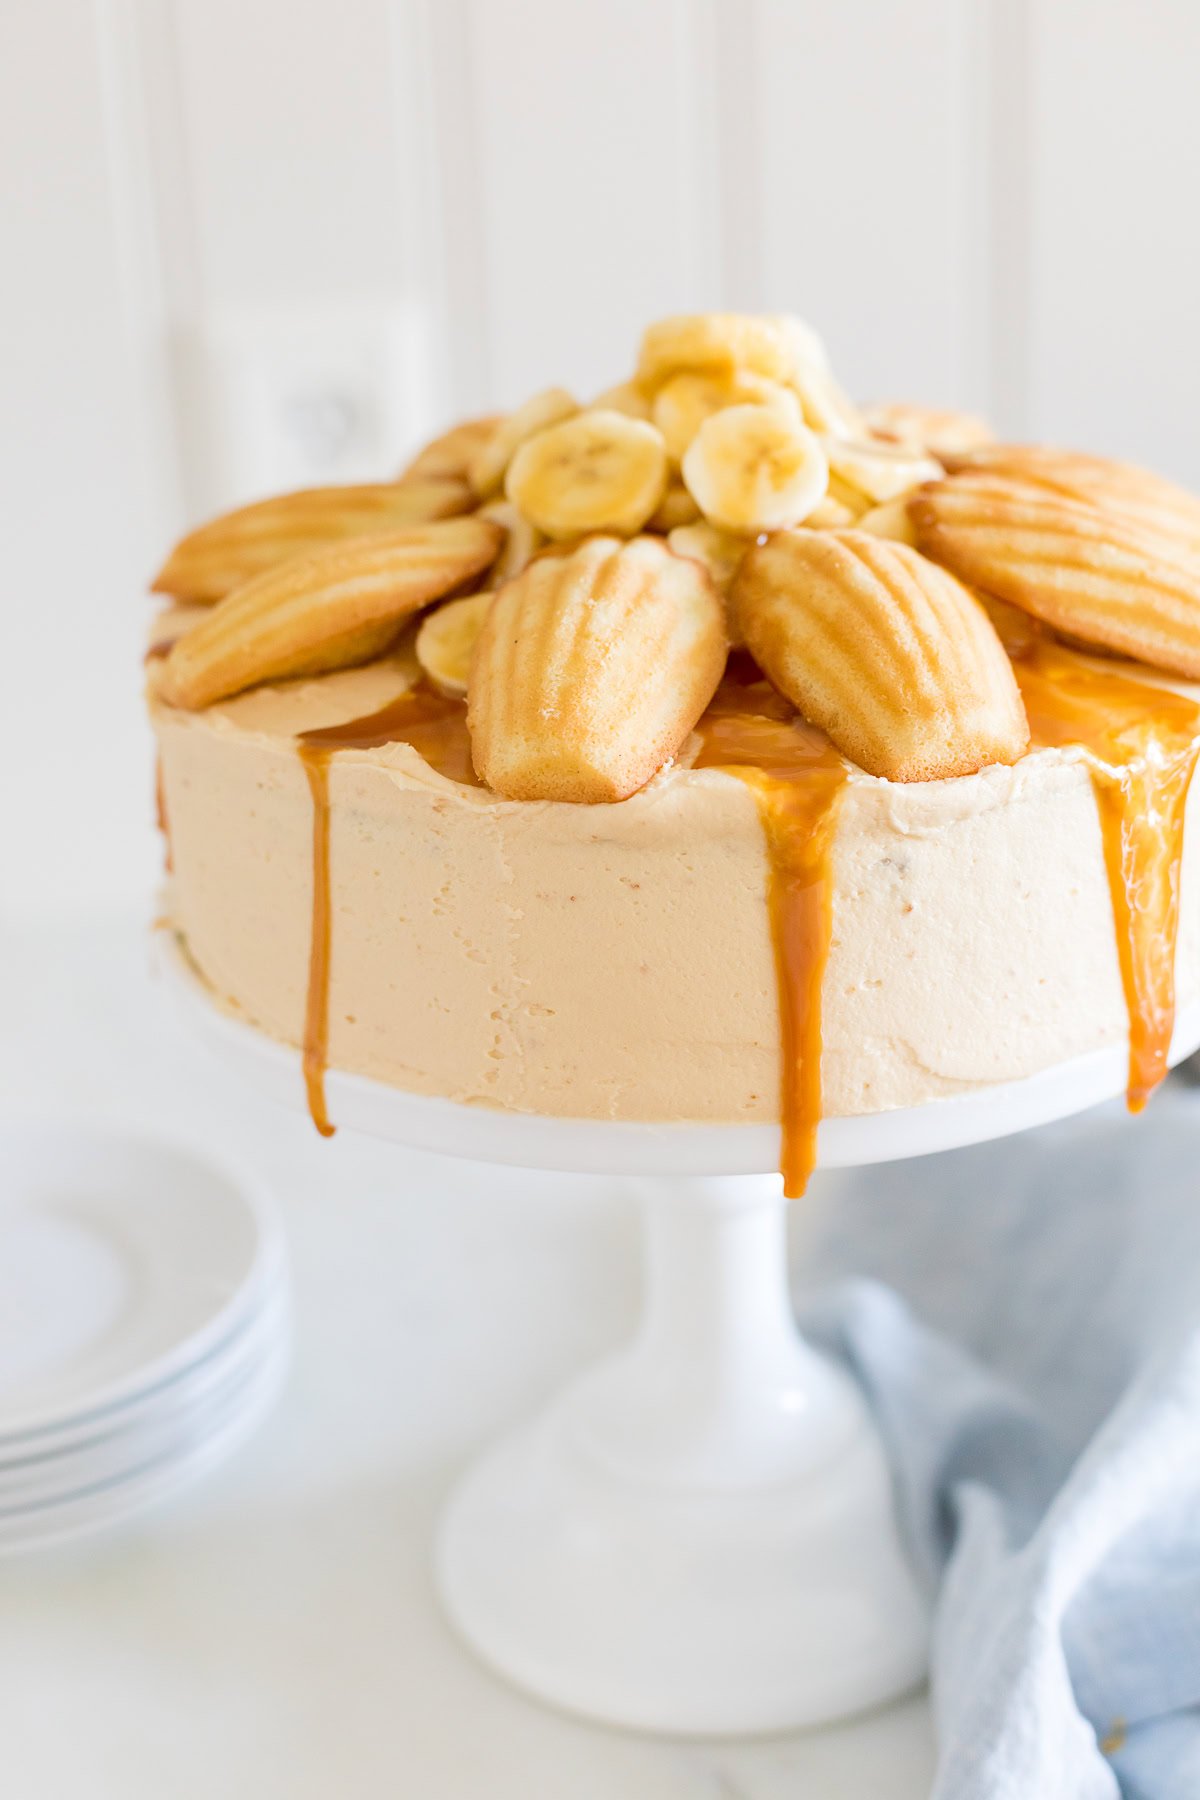 A round cake with salted caramel frosting, topped with bananas and madeleine cookies, sits on a white cake stand. Stacked plates are visible in the background.